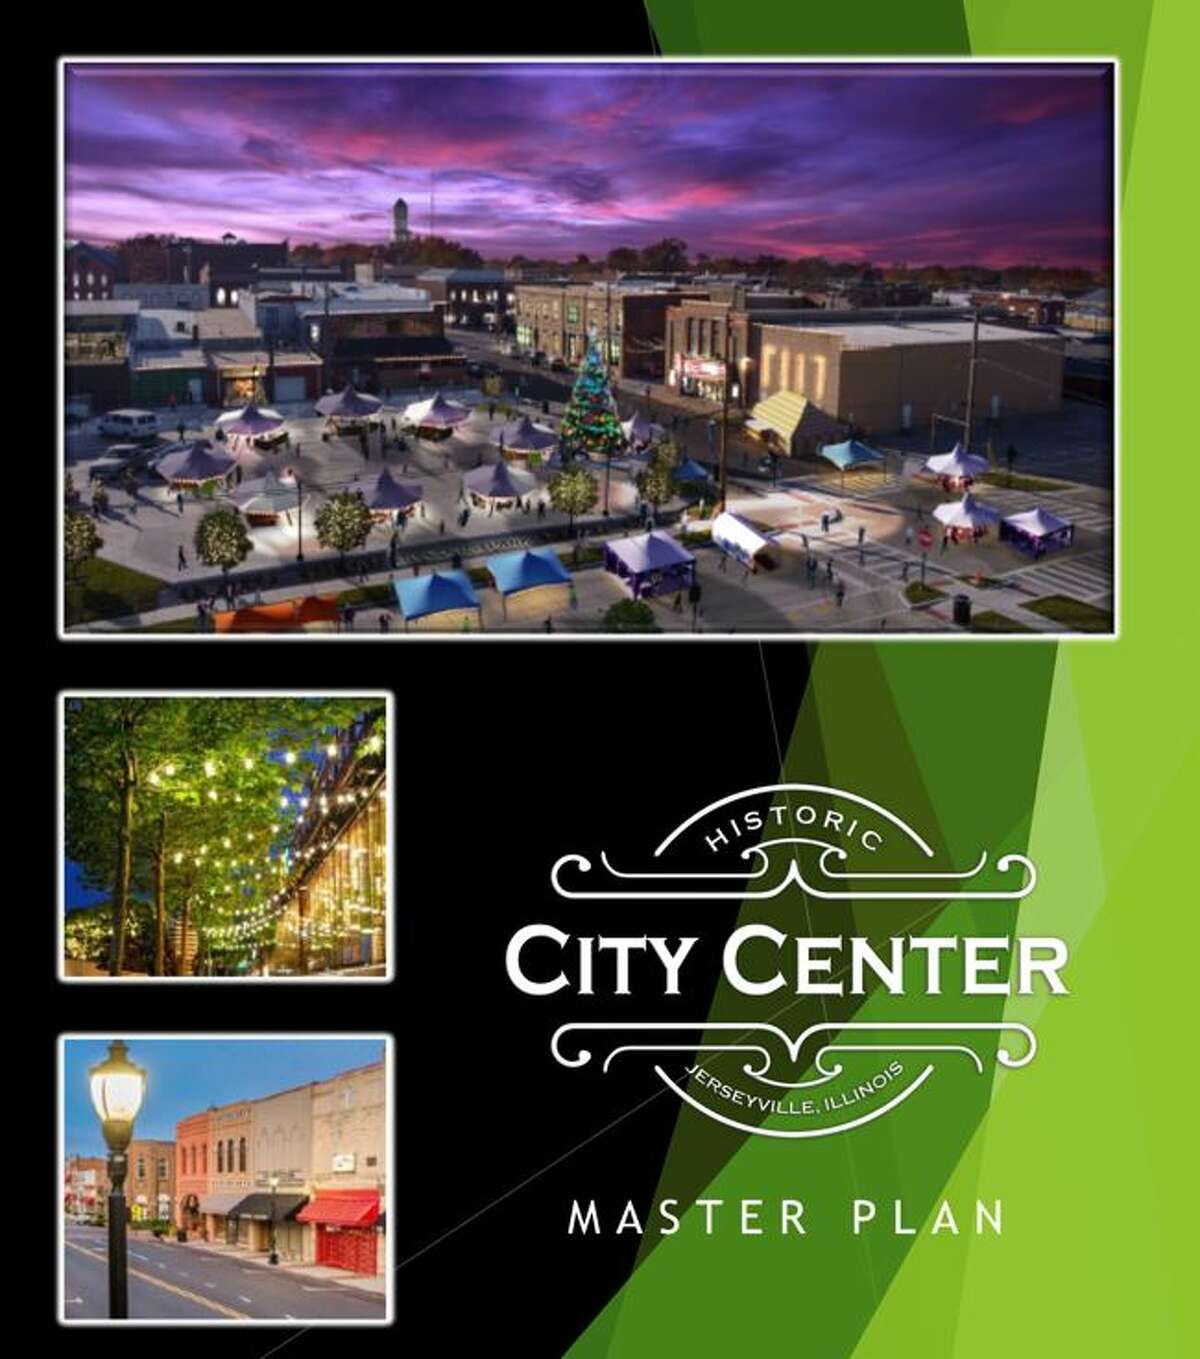 PGAV Planners has developed a master plan for Jerseyville focusing on 13 themes.